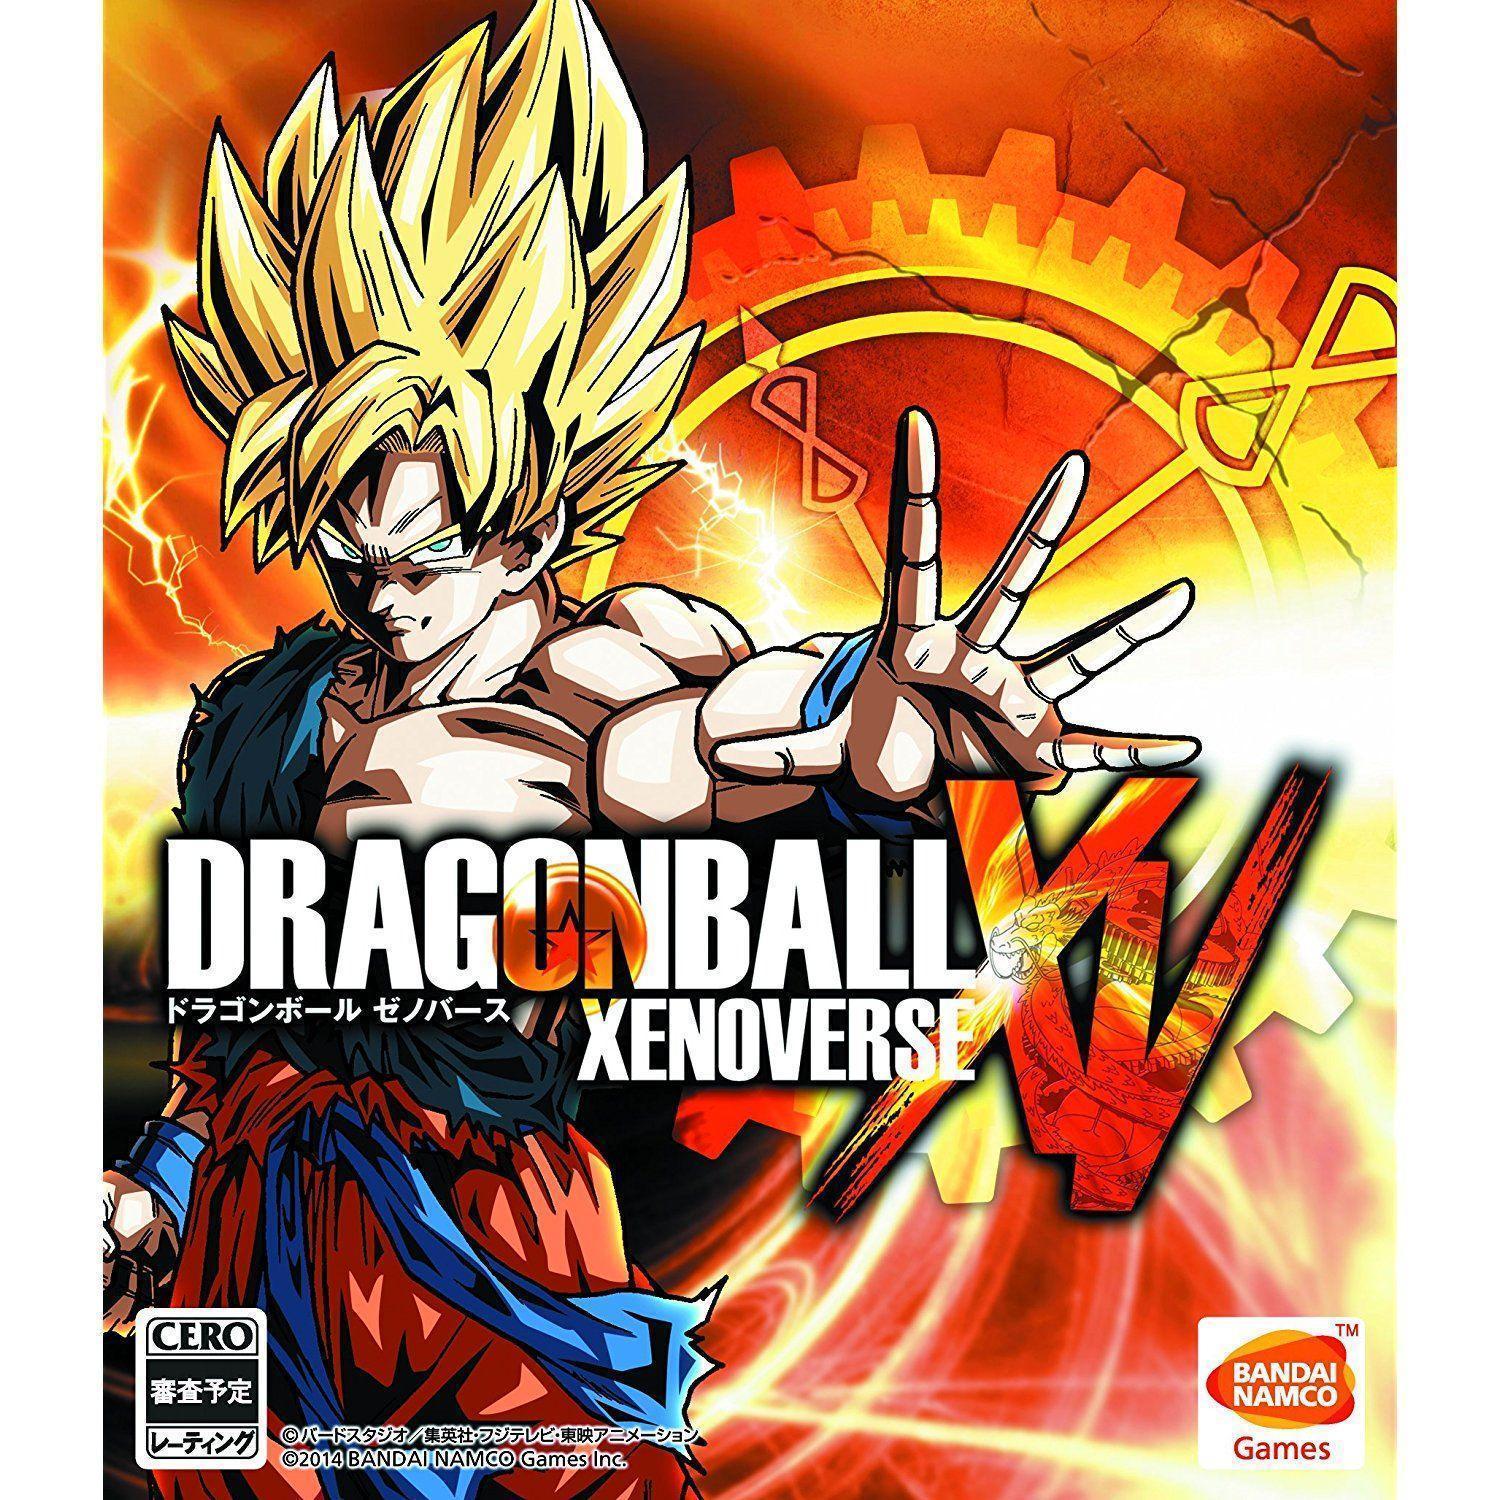 First Print Editions Of Dragon Ball: Xenoverse Will Include A